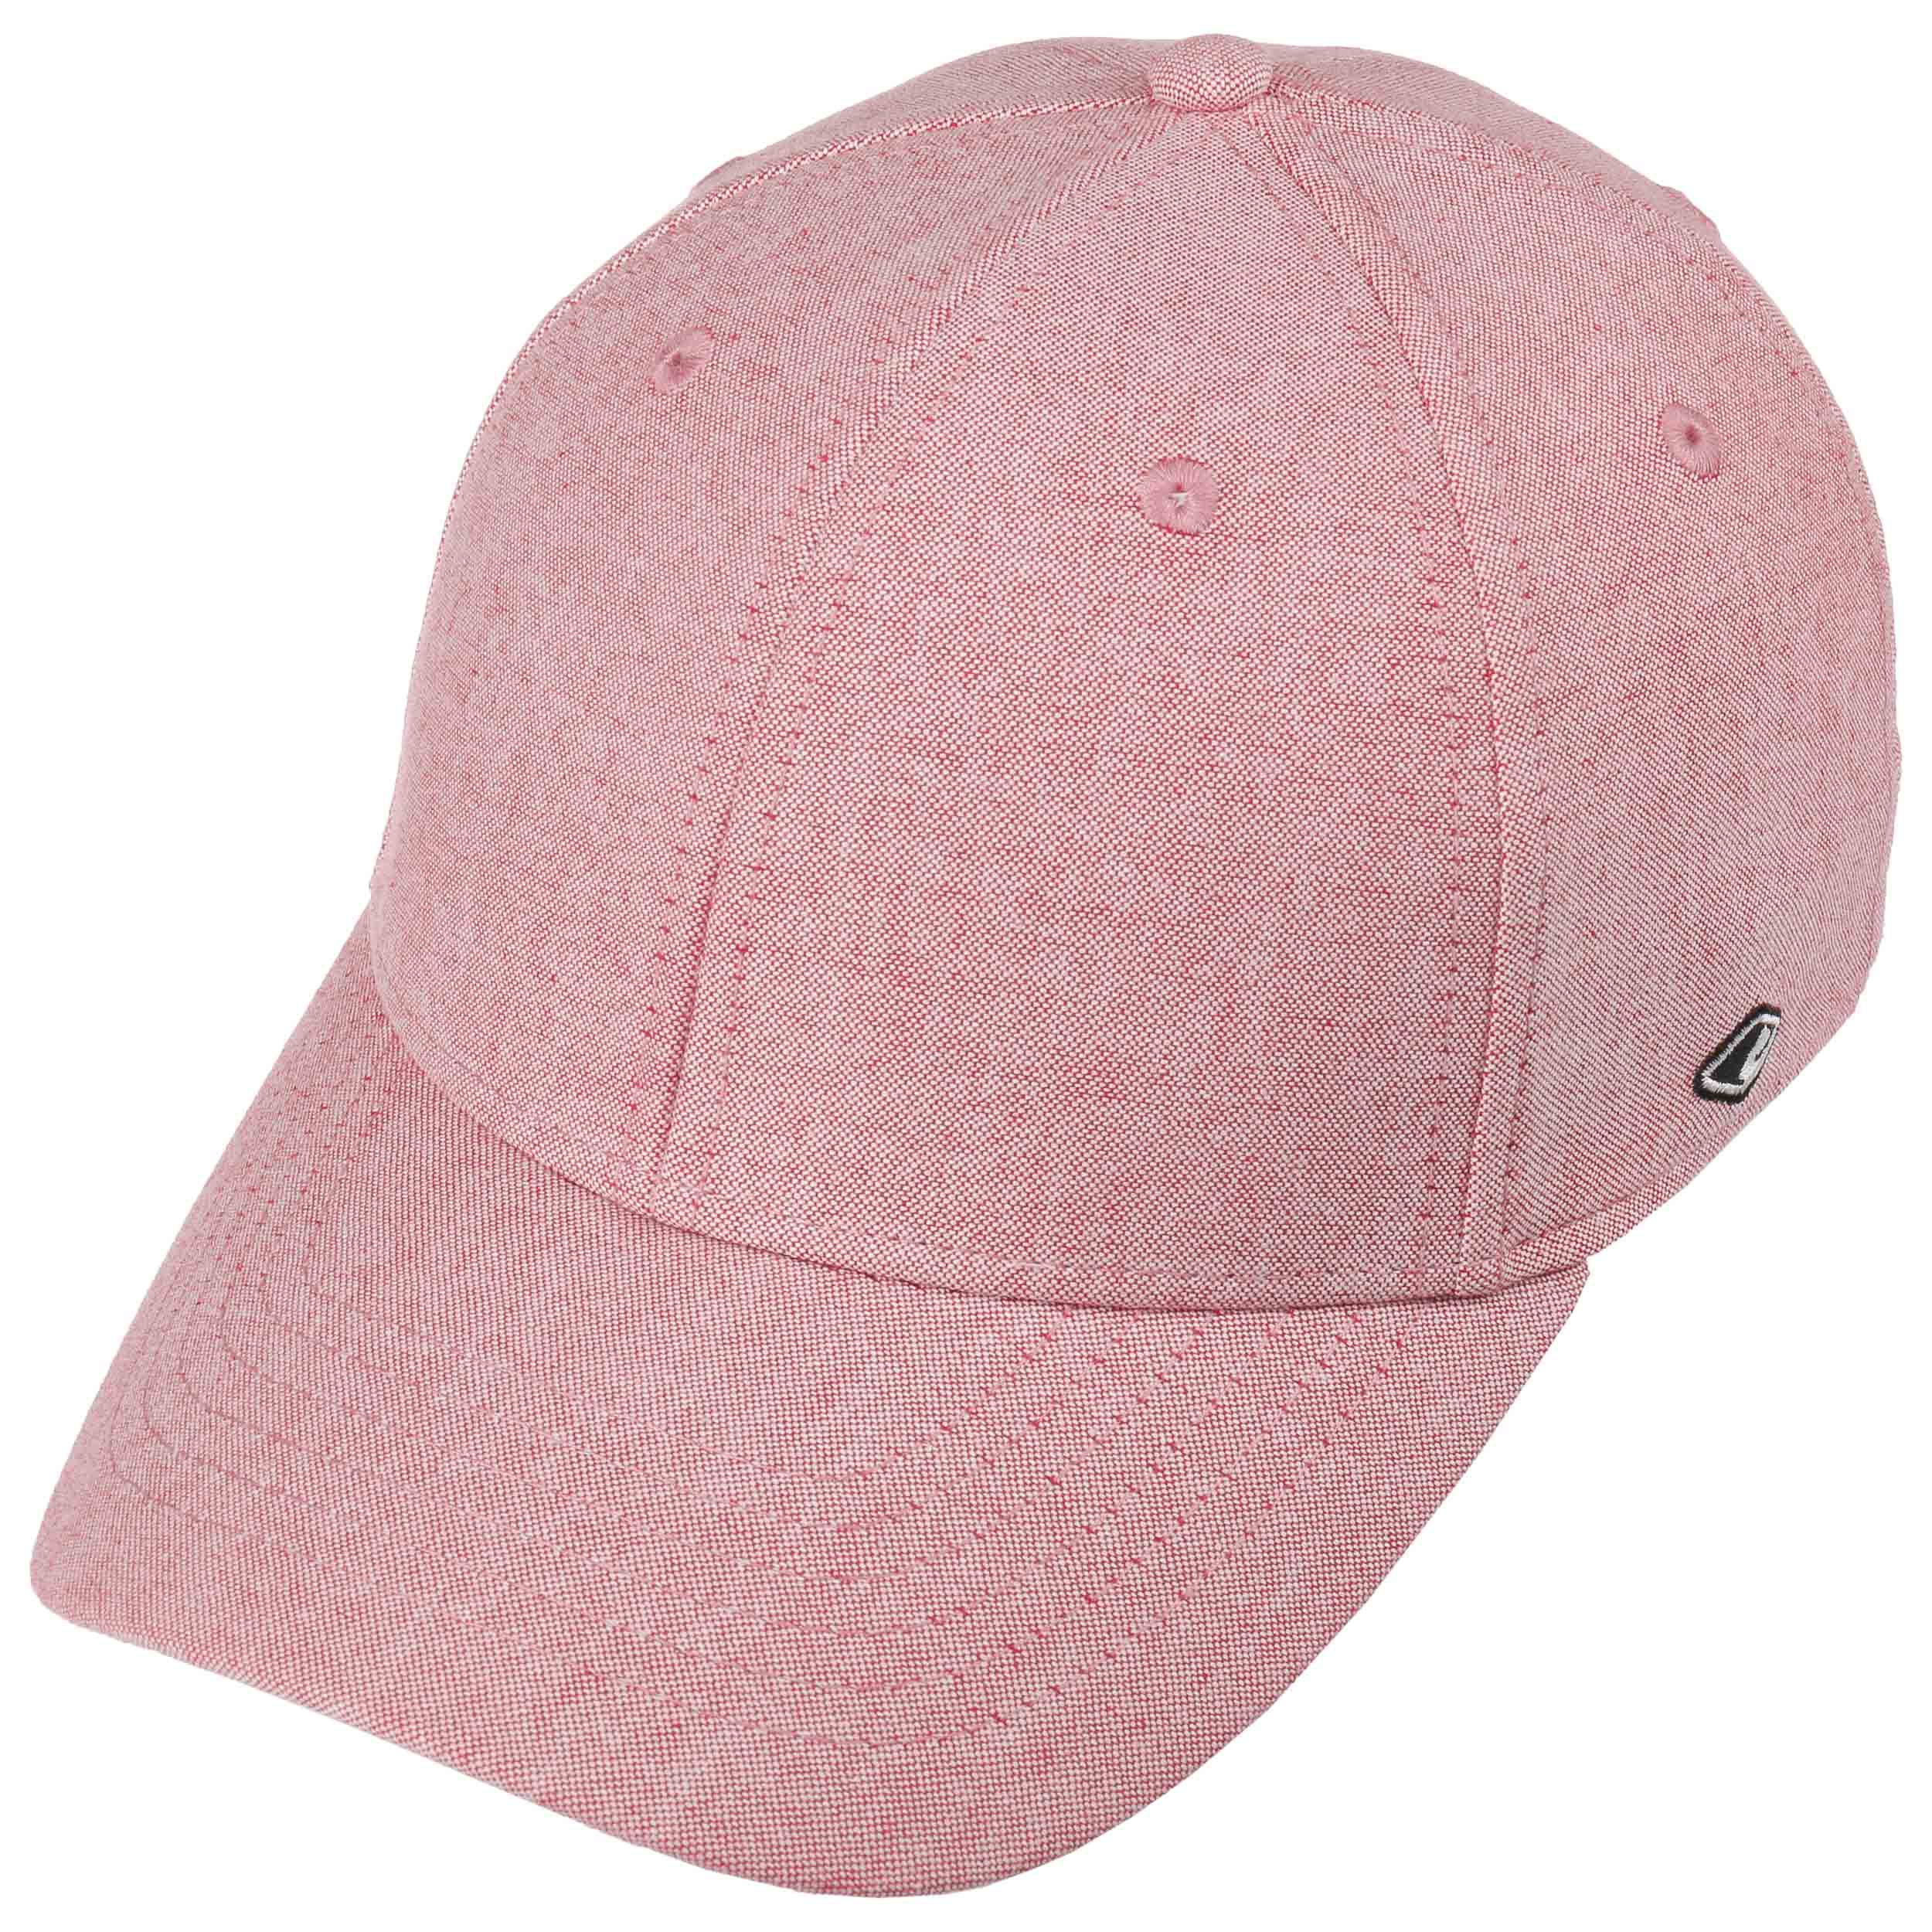 by € 19,95 Chillouts Teran Cap -